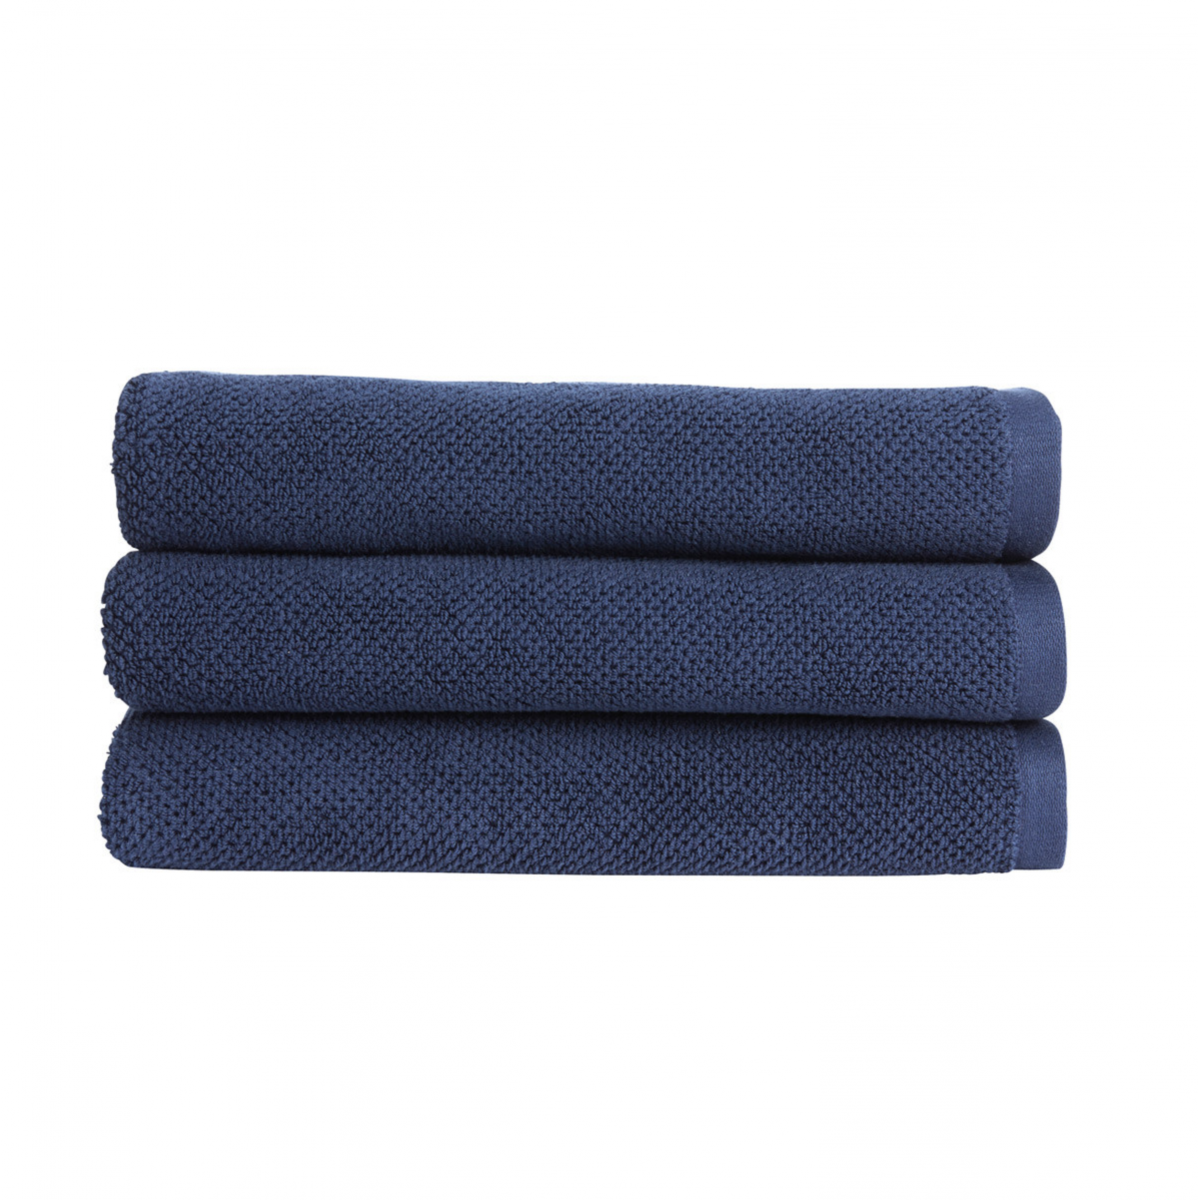 Christy Brixton 600gsm Cotton Towels - Midnight